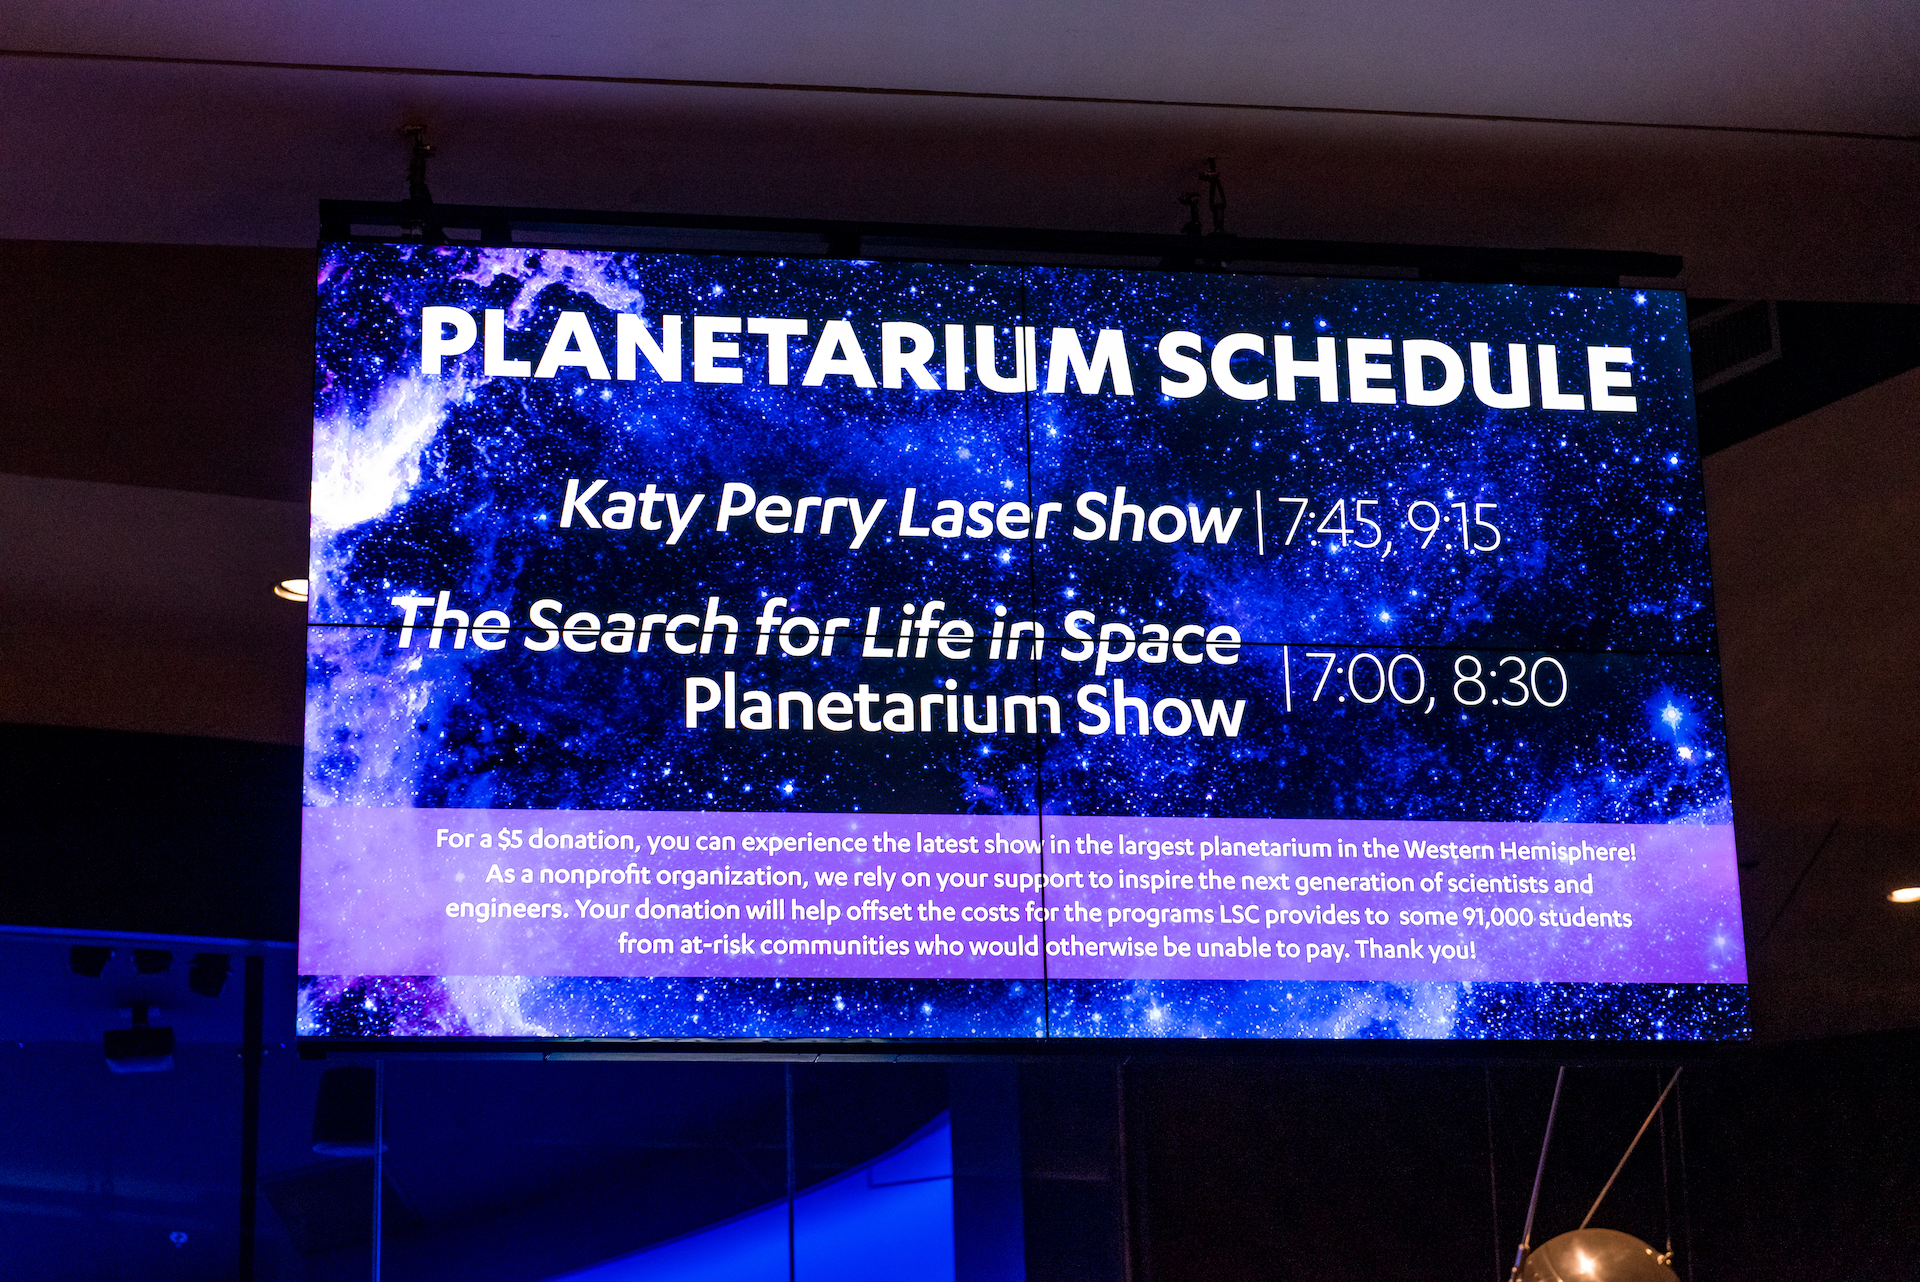 Screen showing times for Katy Perry Laser Show and The Search for Life in Space planetarium show